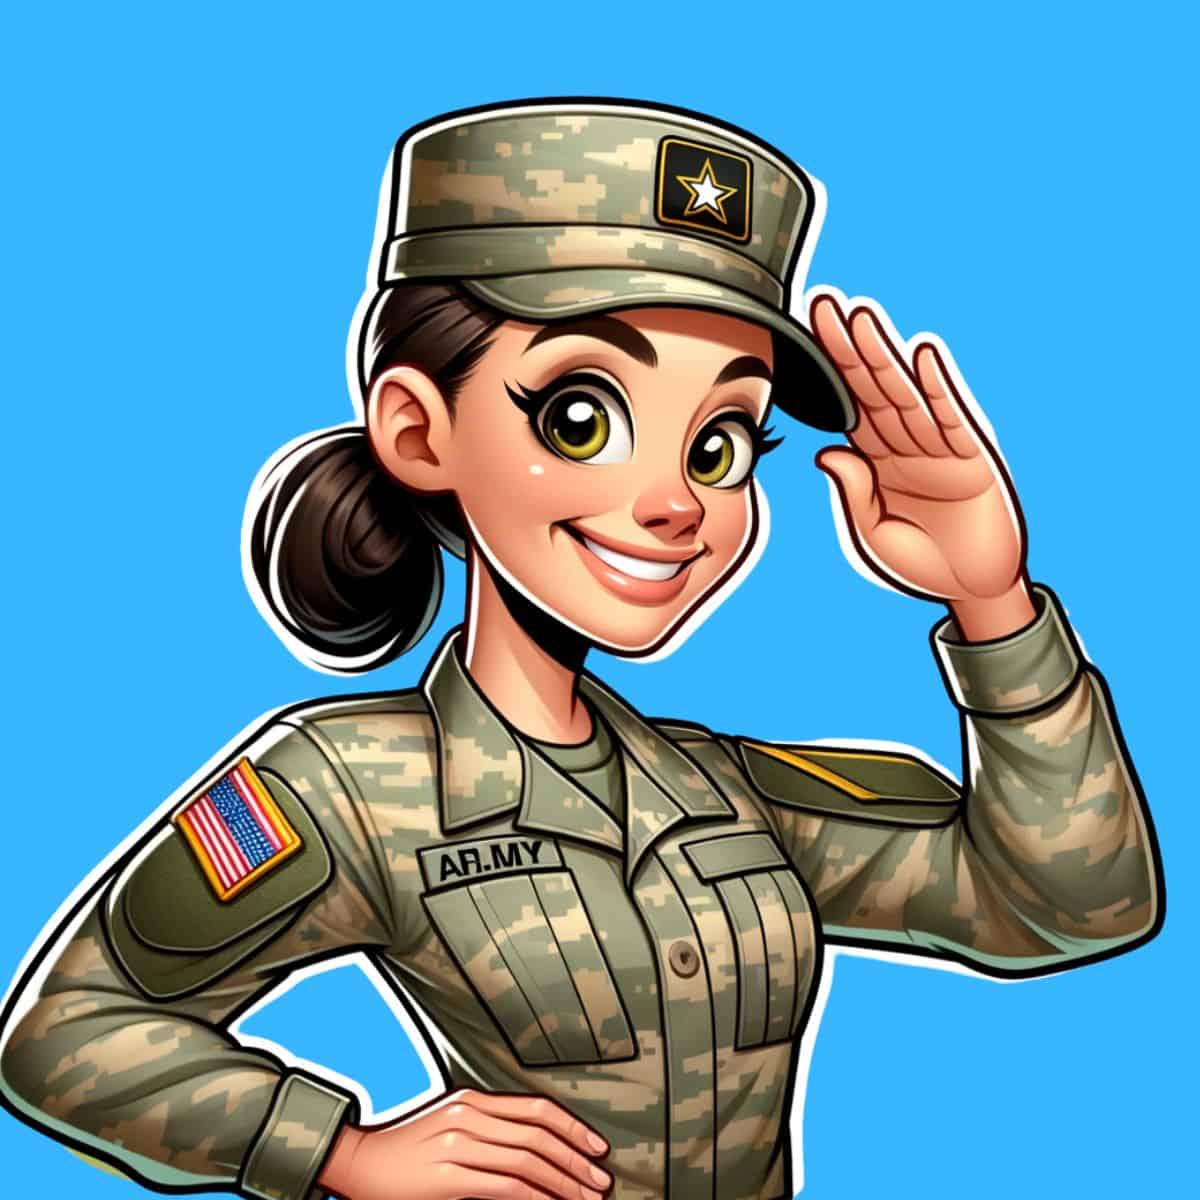 A cartoon graphic of a female army officer saluting on a blue background.